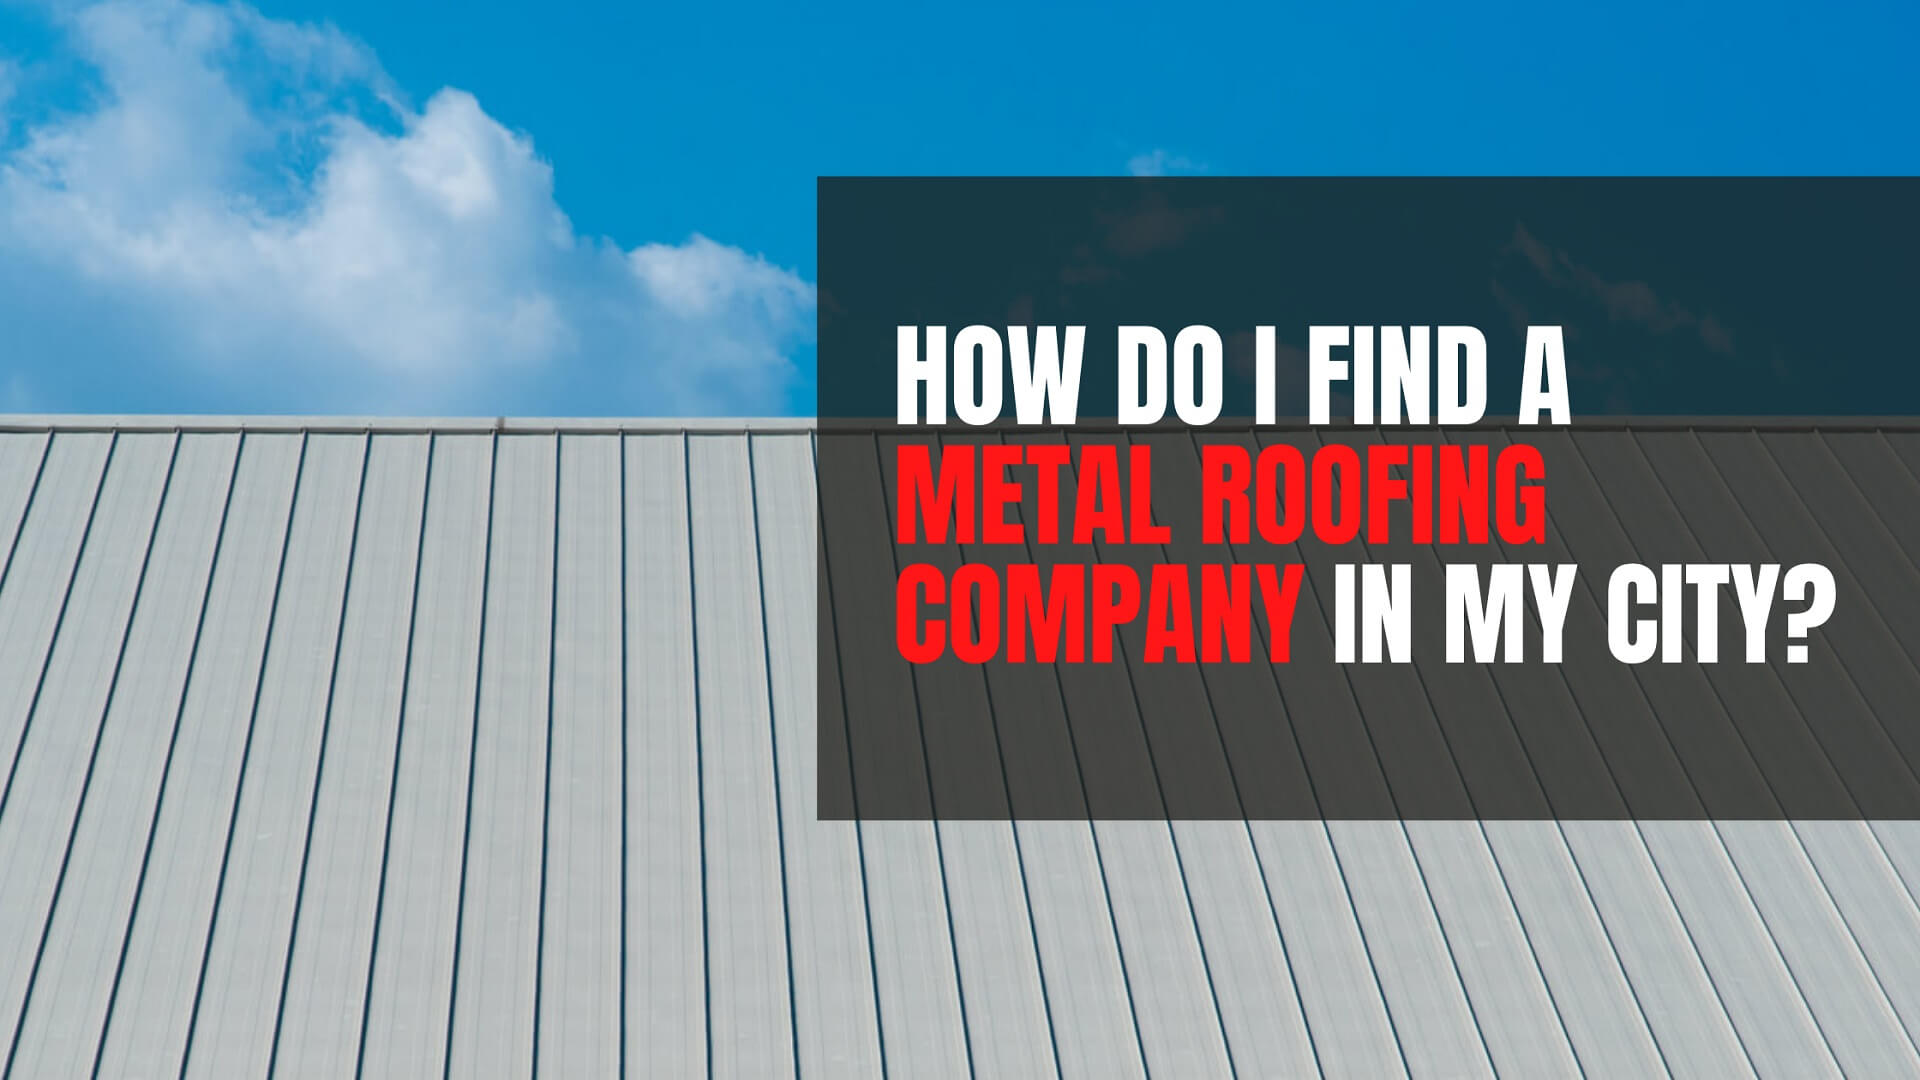 How_do_I find a_metal roofing company in my city